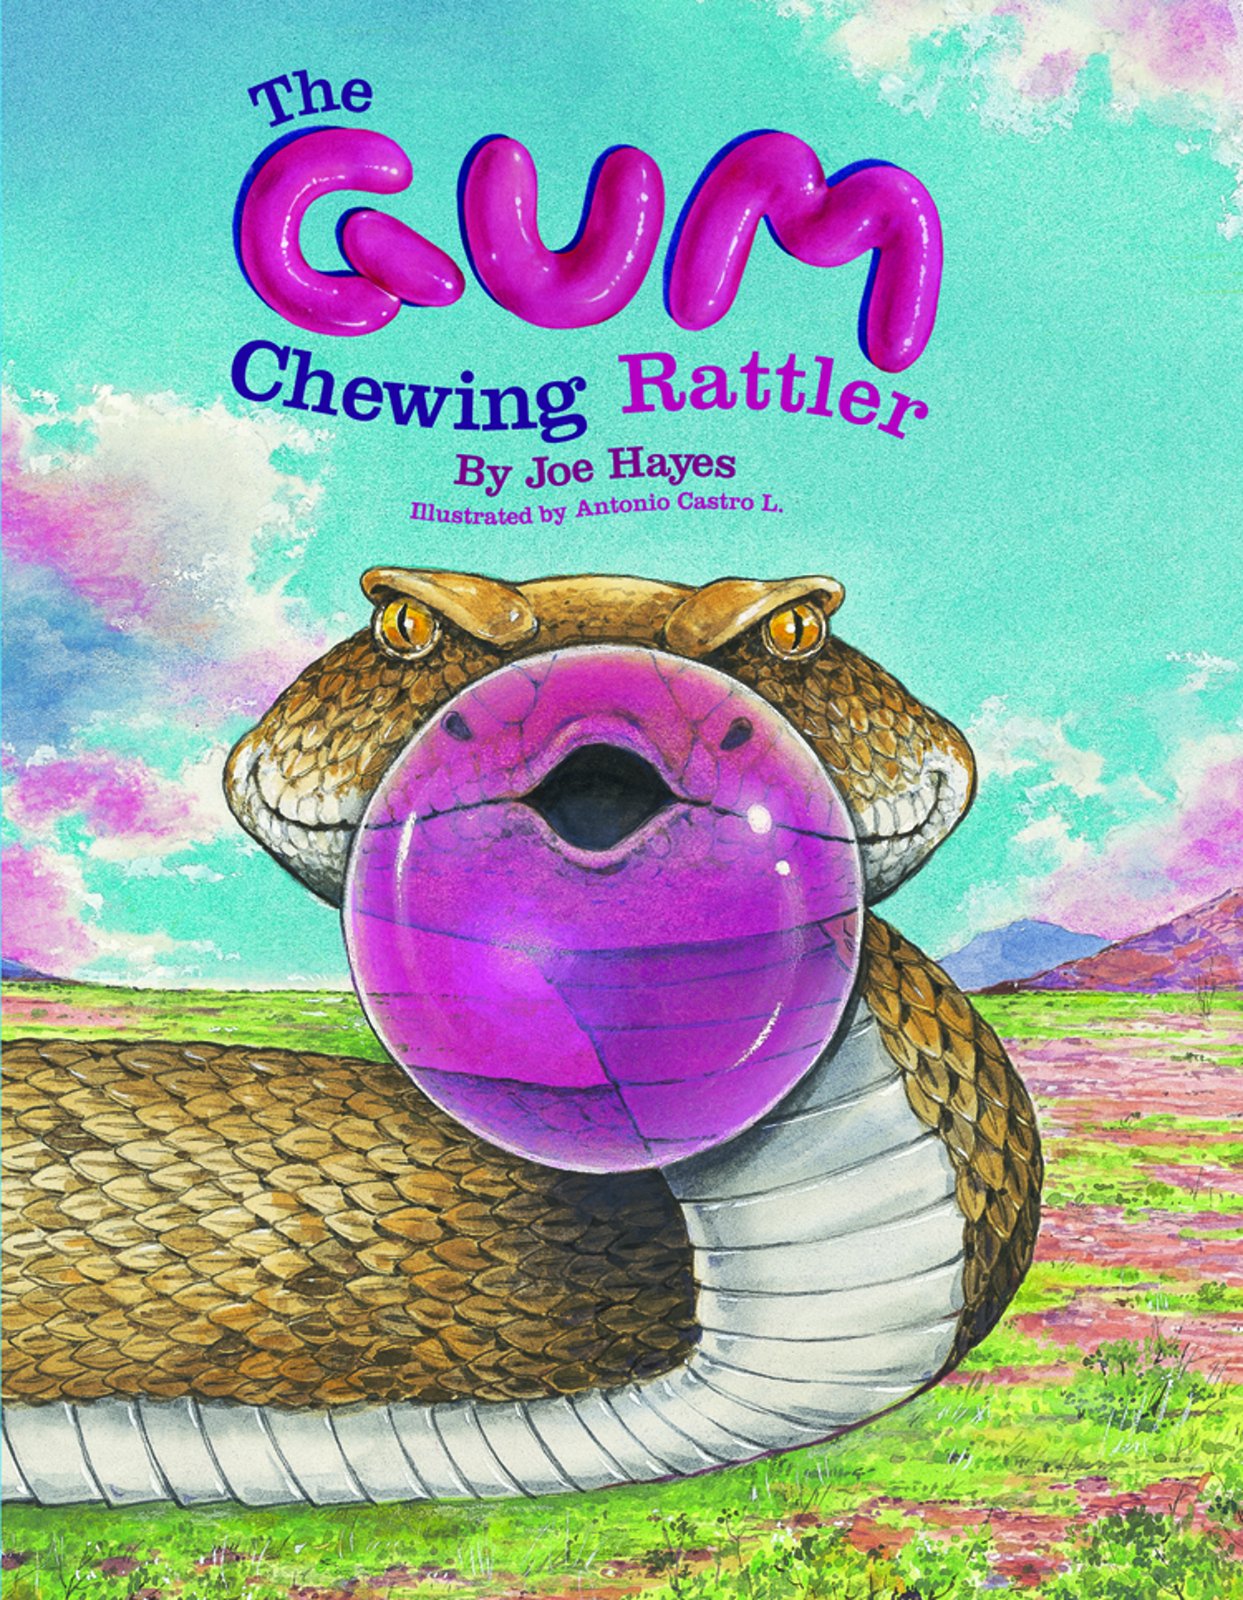 The Gum- Chewing Rattler